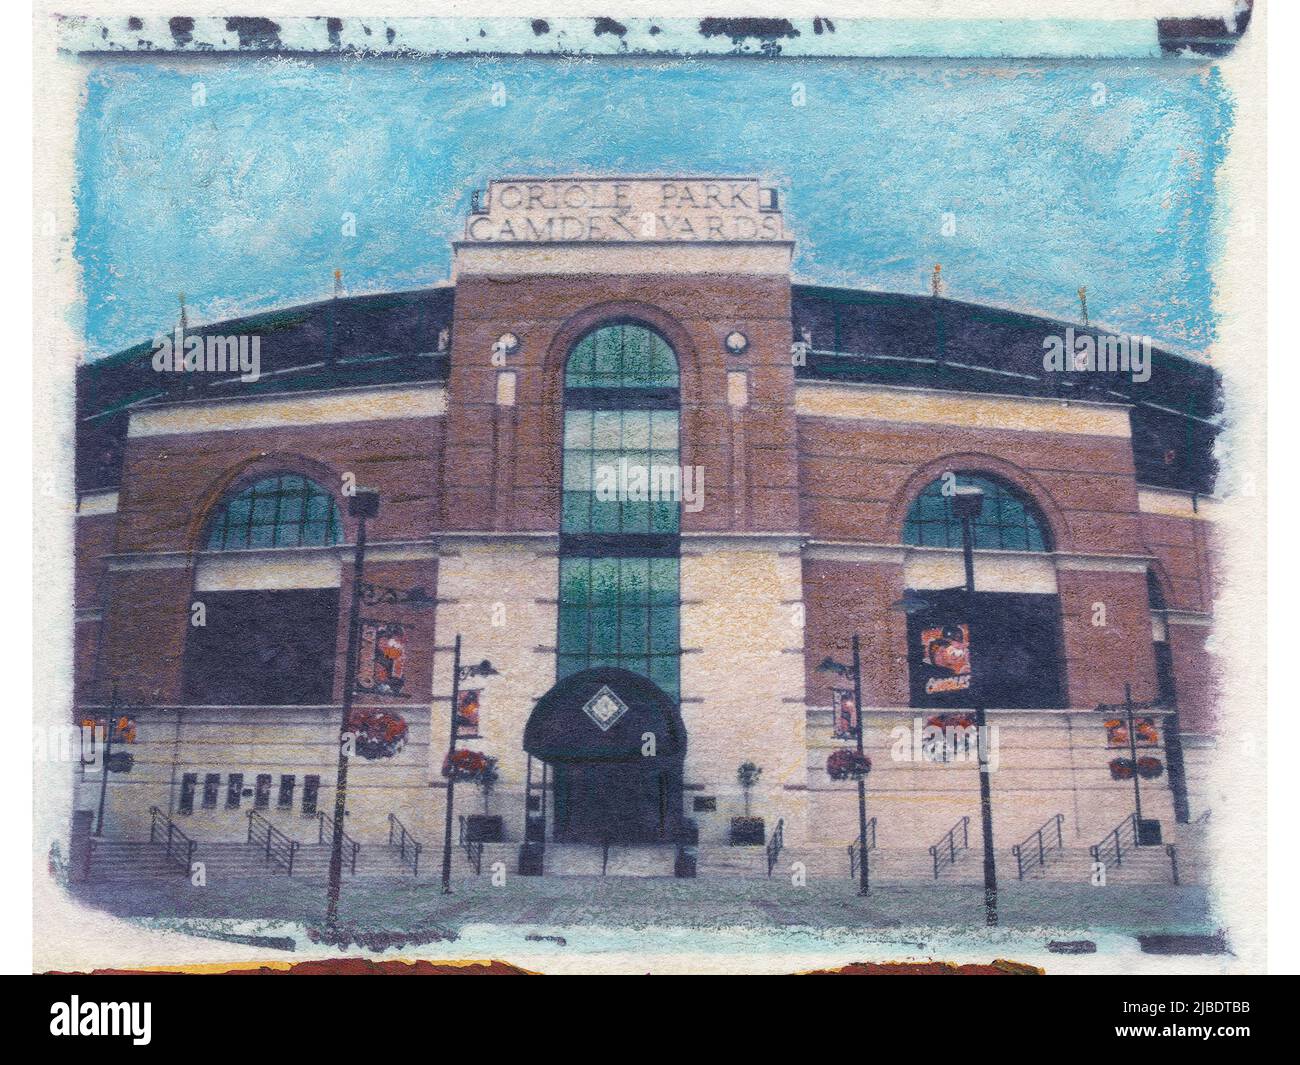 MLB Baltimore Orioles Camden yards Banque D'Images